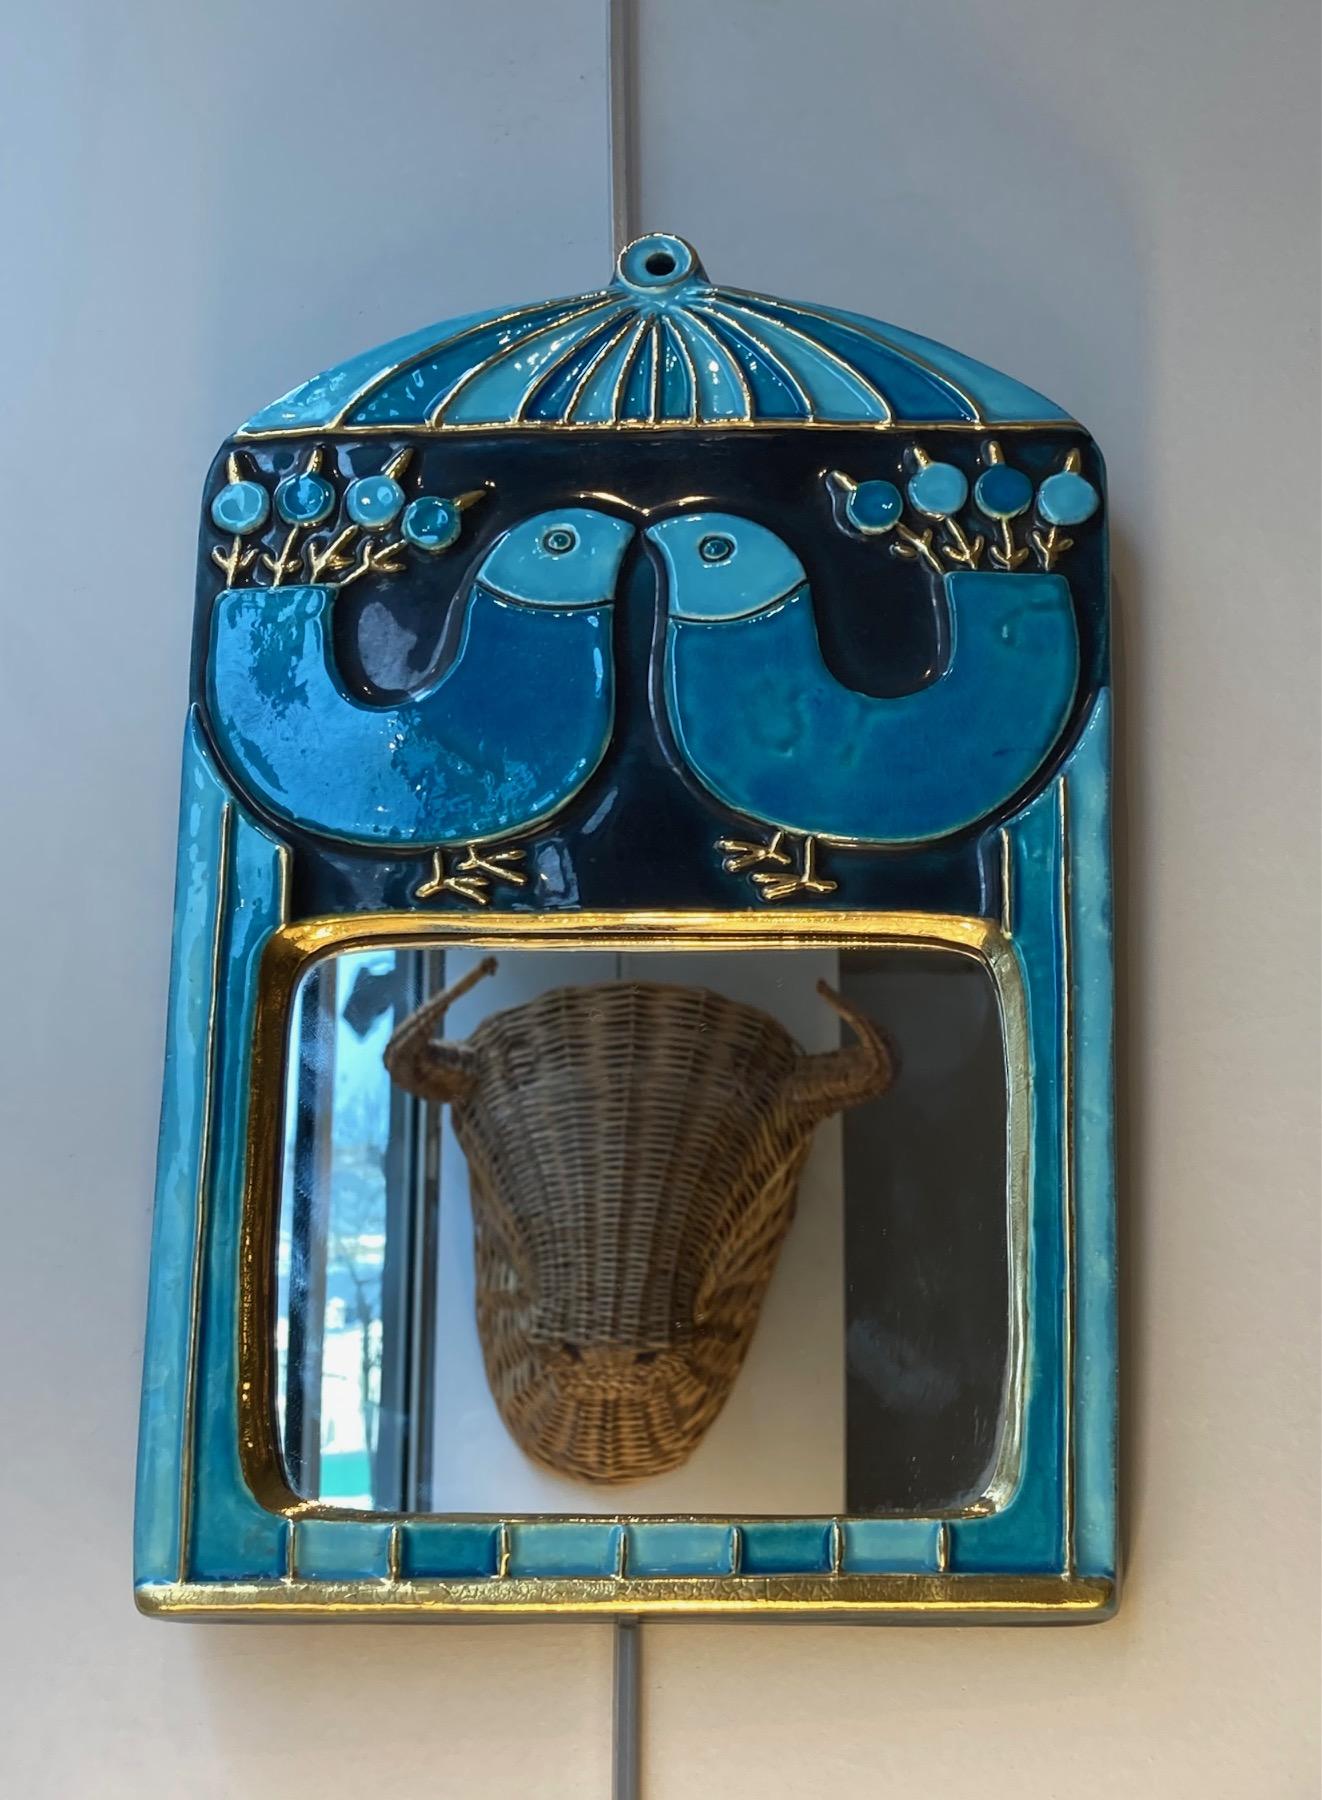 A ceramic wall mirror, with 2 birds facing each other, enameled in 2 shades of blue, black and gold.
Mithé Espelt (born 1923)
Lunel, south of France,
circa 1970
This poetic work of art demonstrates Mithé Espelt's talent for design and her